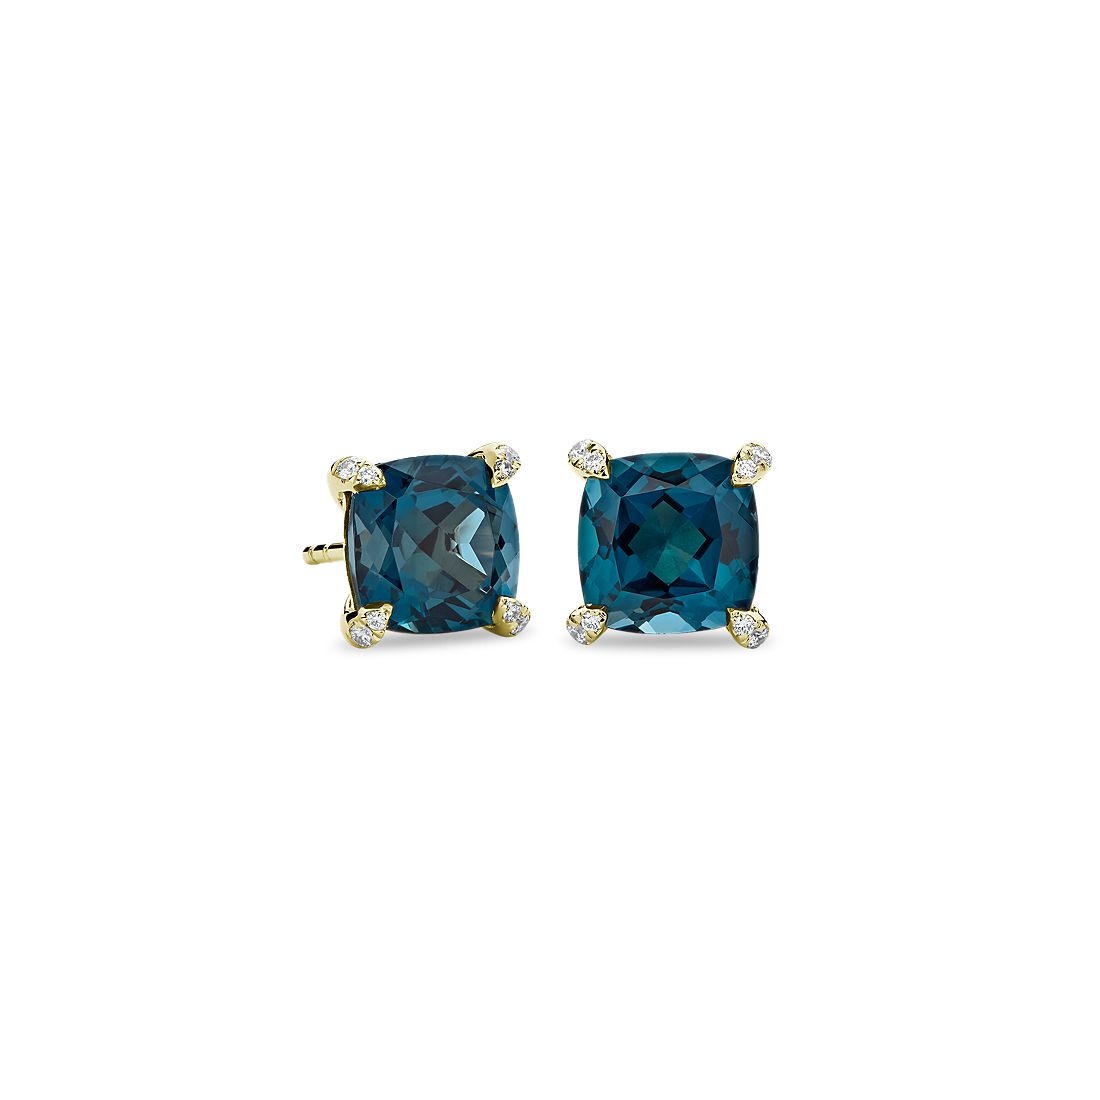 Cushion Cut London Blue Topaz and Diamond Accent Earrings in 14k Yellow Gold (7mm)